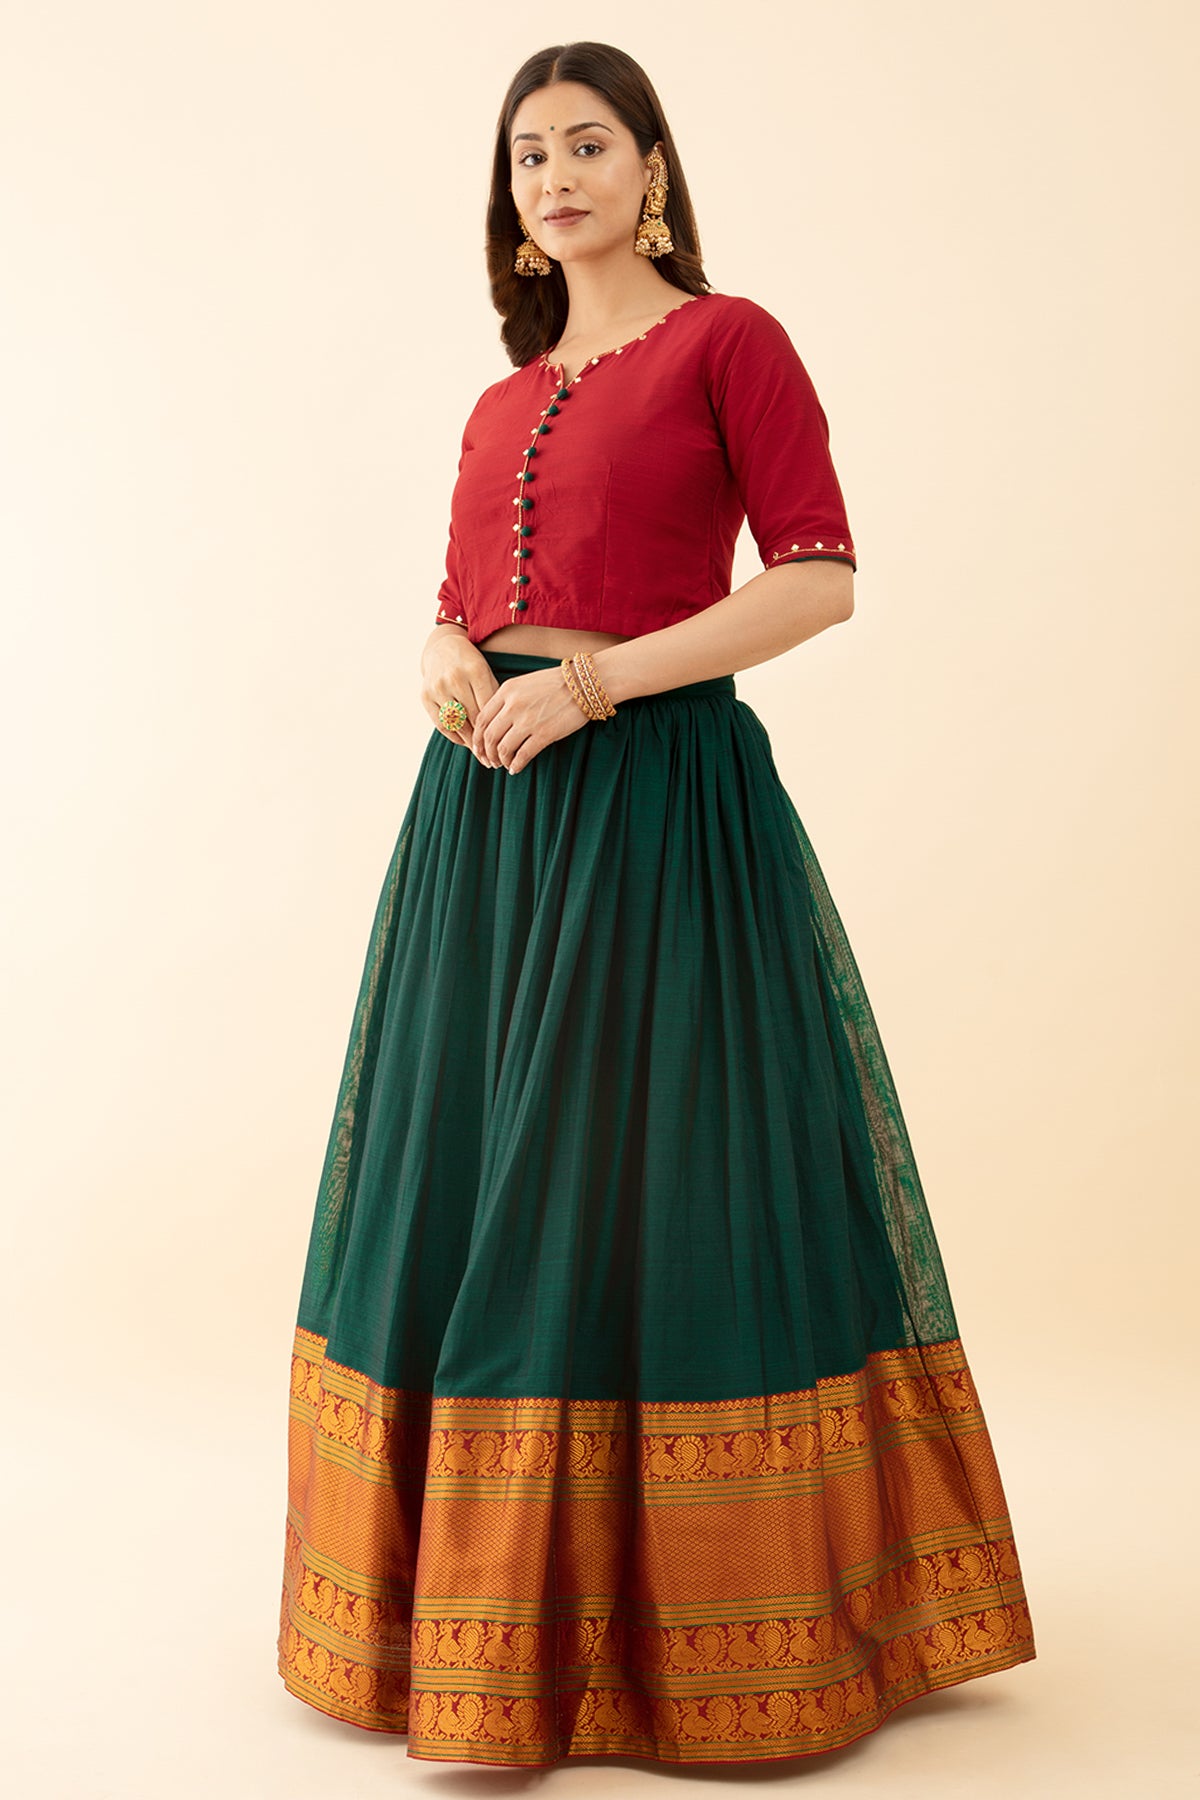 Mangalagiri Skirt Set Embroidered Design with Potli Buttons